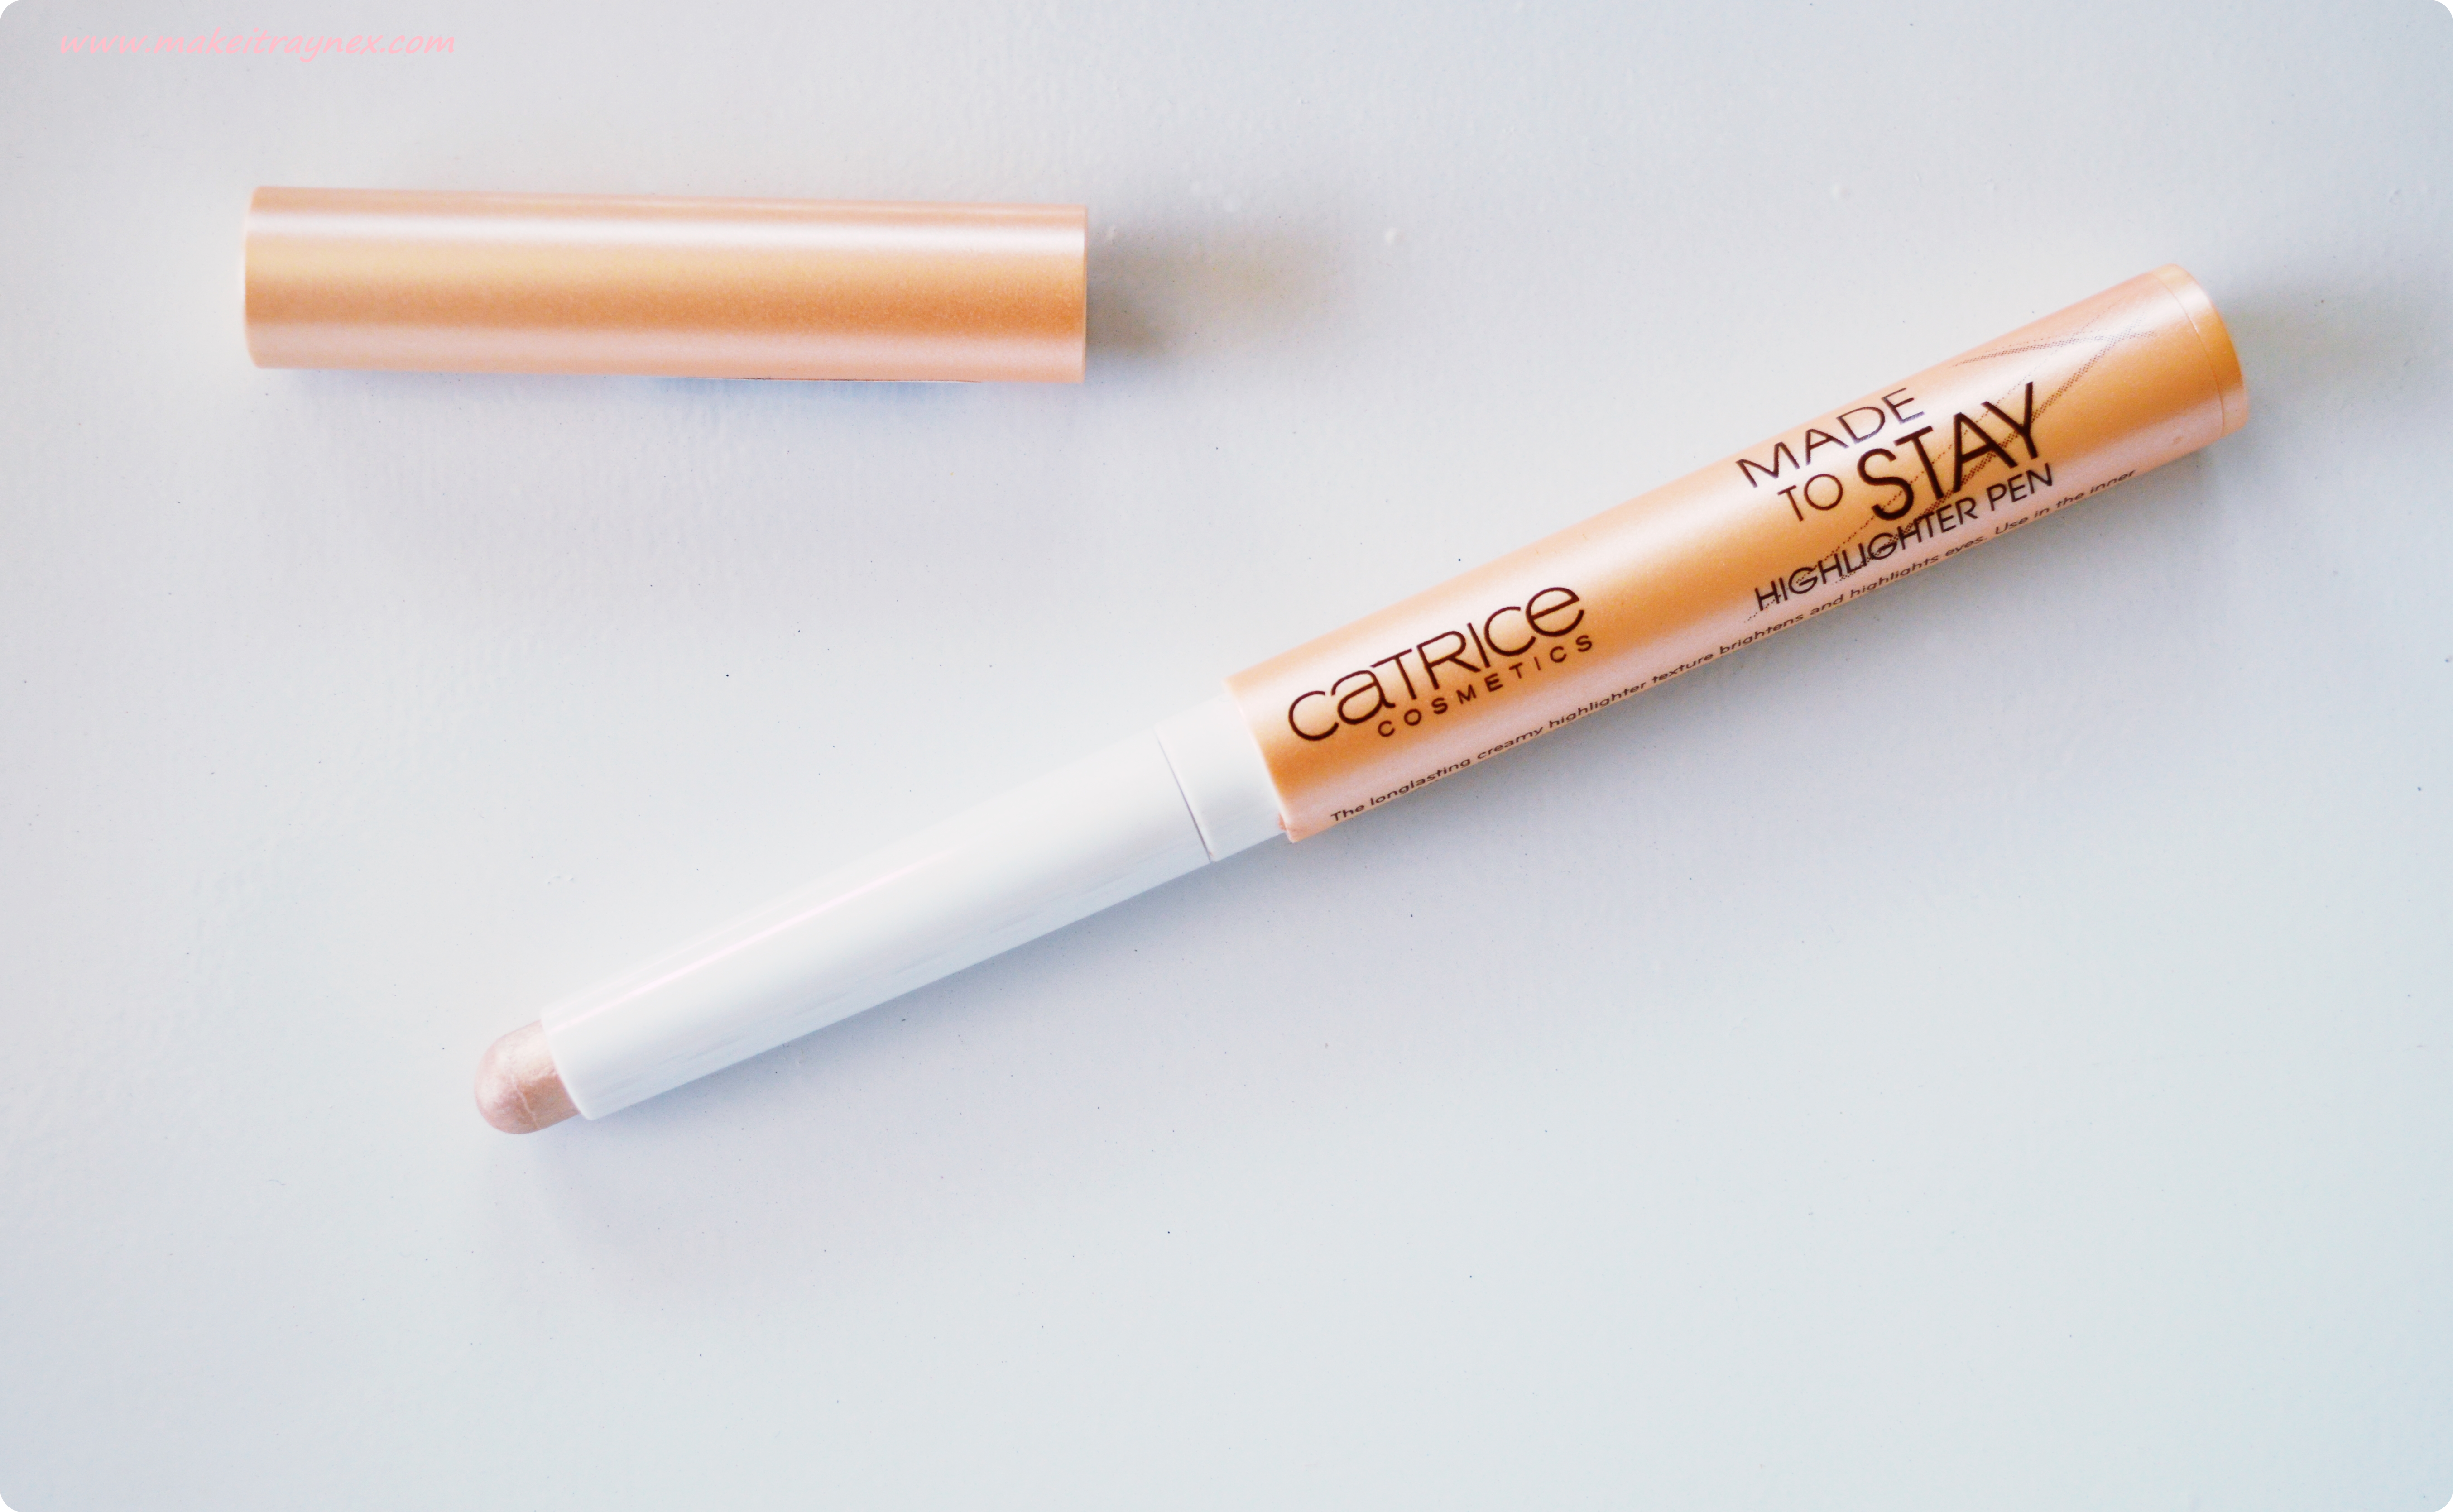 Made To Stay Highlighter Pen from CATRICE {REVIEW}